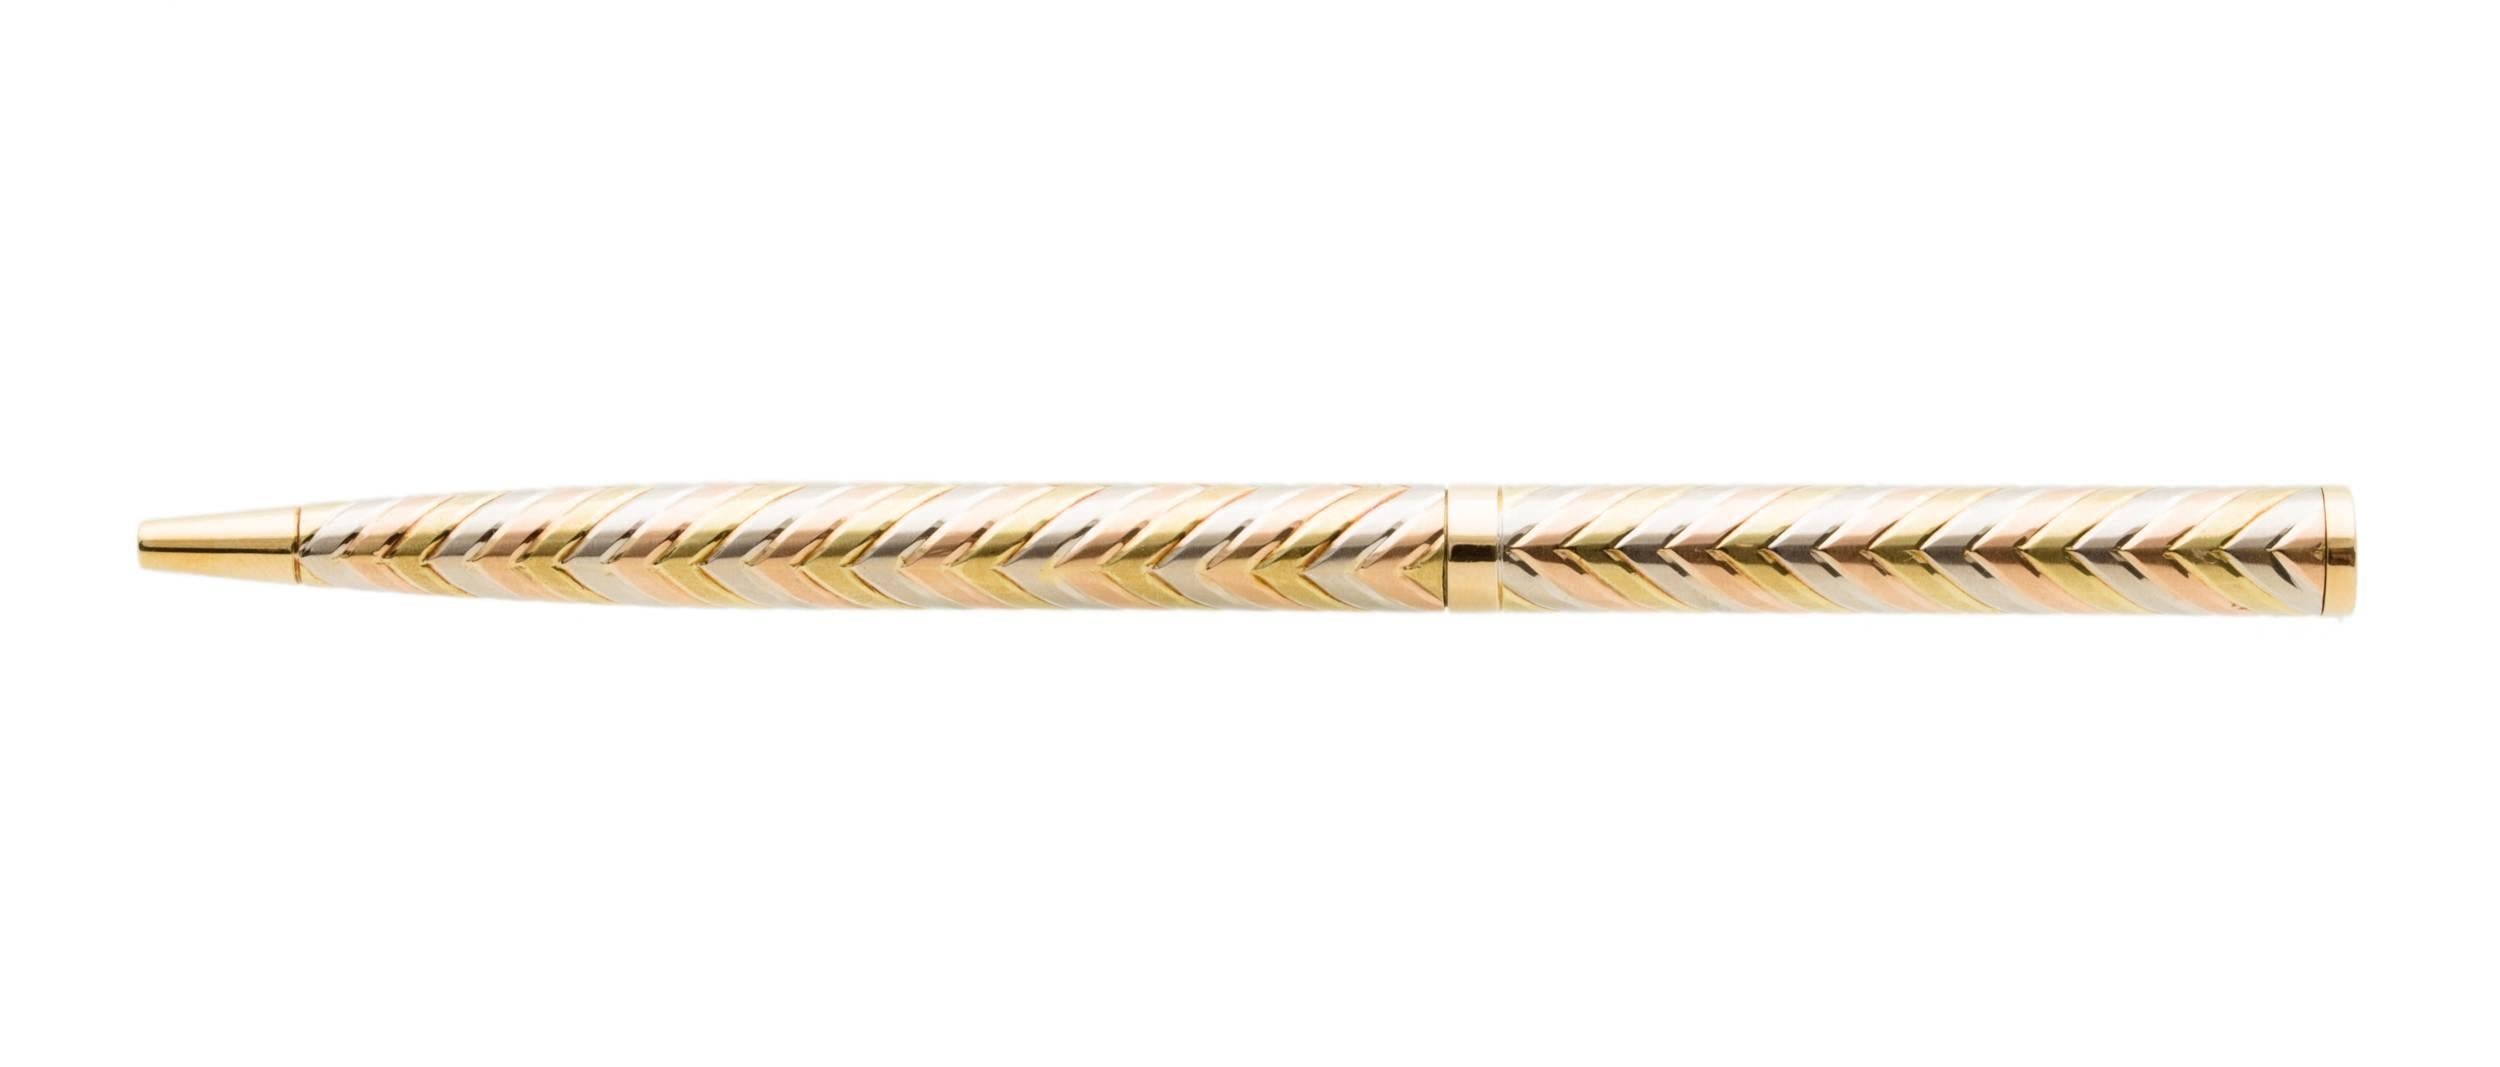 Solid 18K Tricolor Gold Pen in 18K Yellow, White and Rose Gold. Total Gold Weight 27.8 gr, Total Diamond Weight 0.36 carat. Ink Refills, Hallmark: 